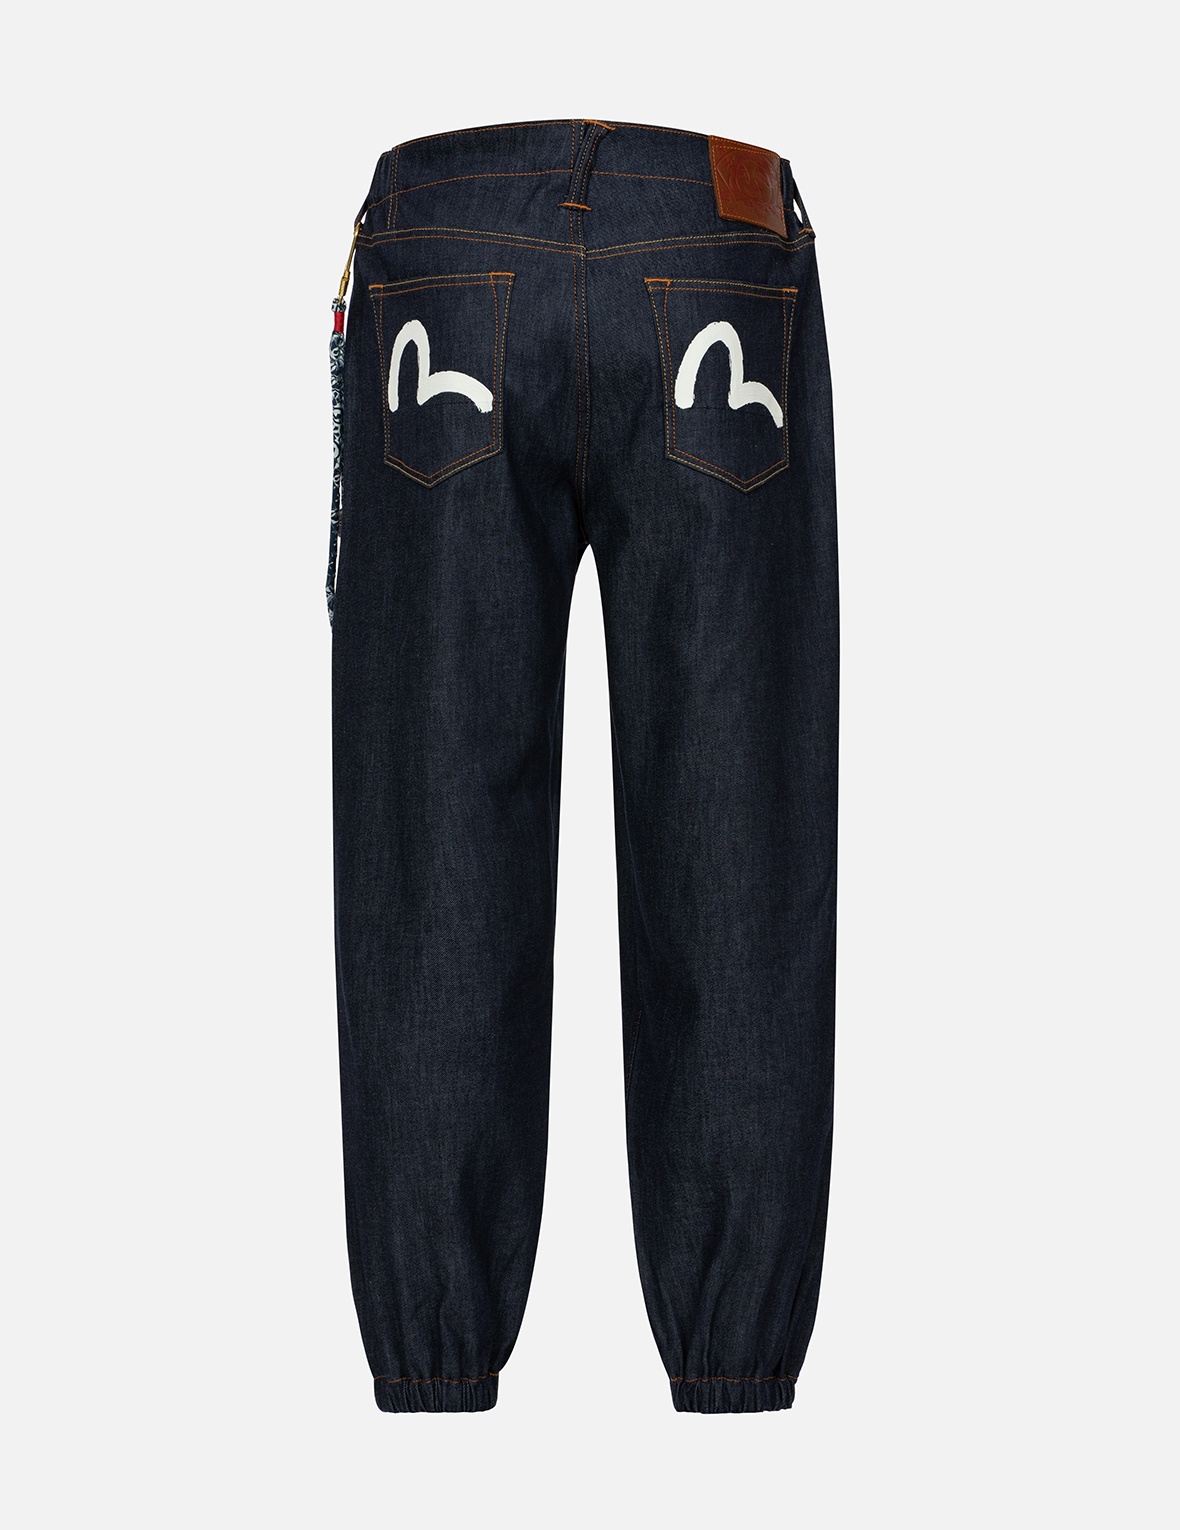 SEAGULL PRINT WITH DENIM CHAIN RELAX FIT DENIM JOGGERS - 2